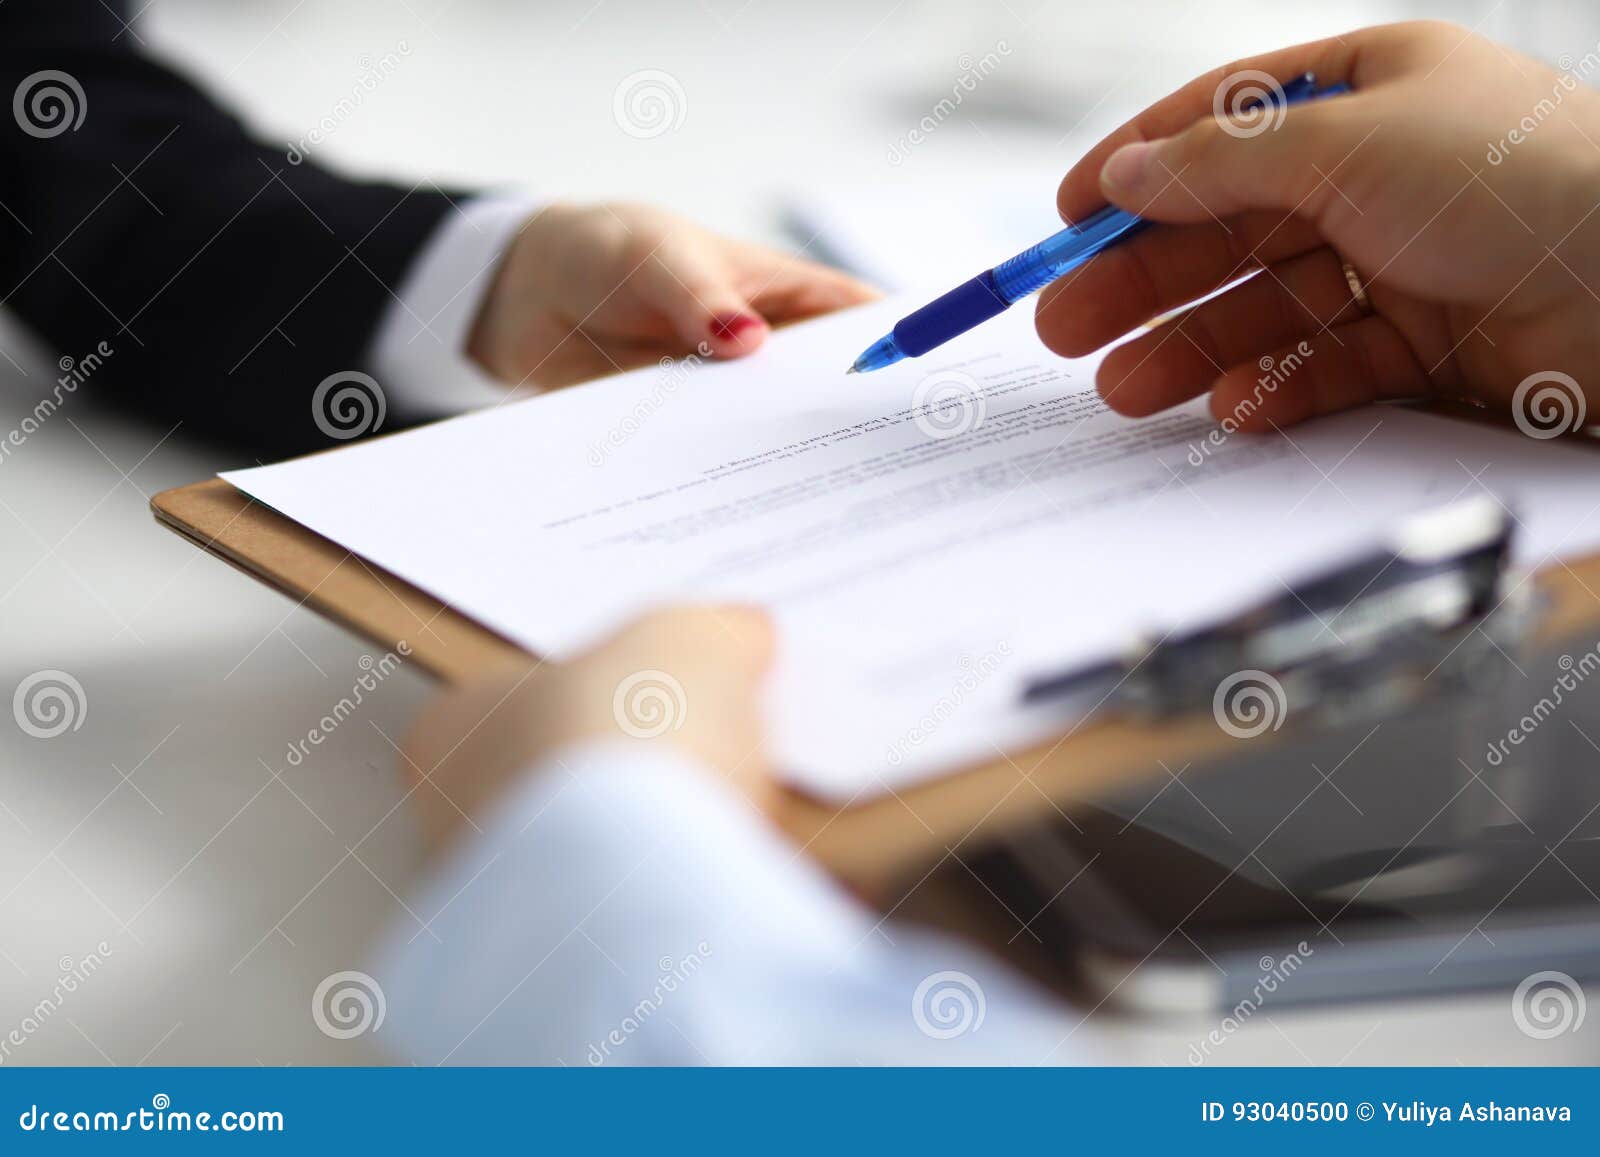 Close up of an executive hands holding a pen and indicating where to sign a contract at office.